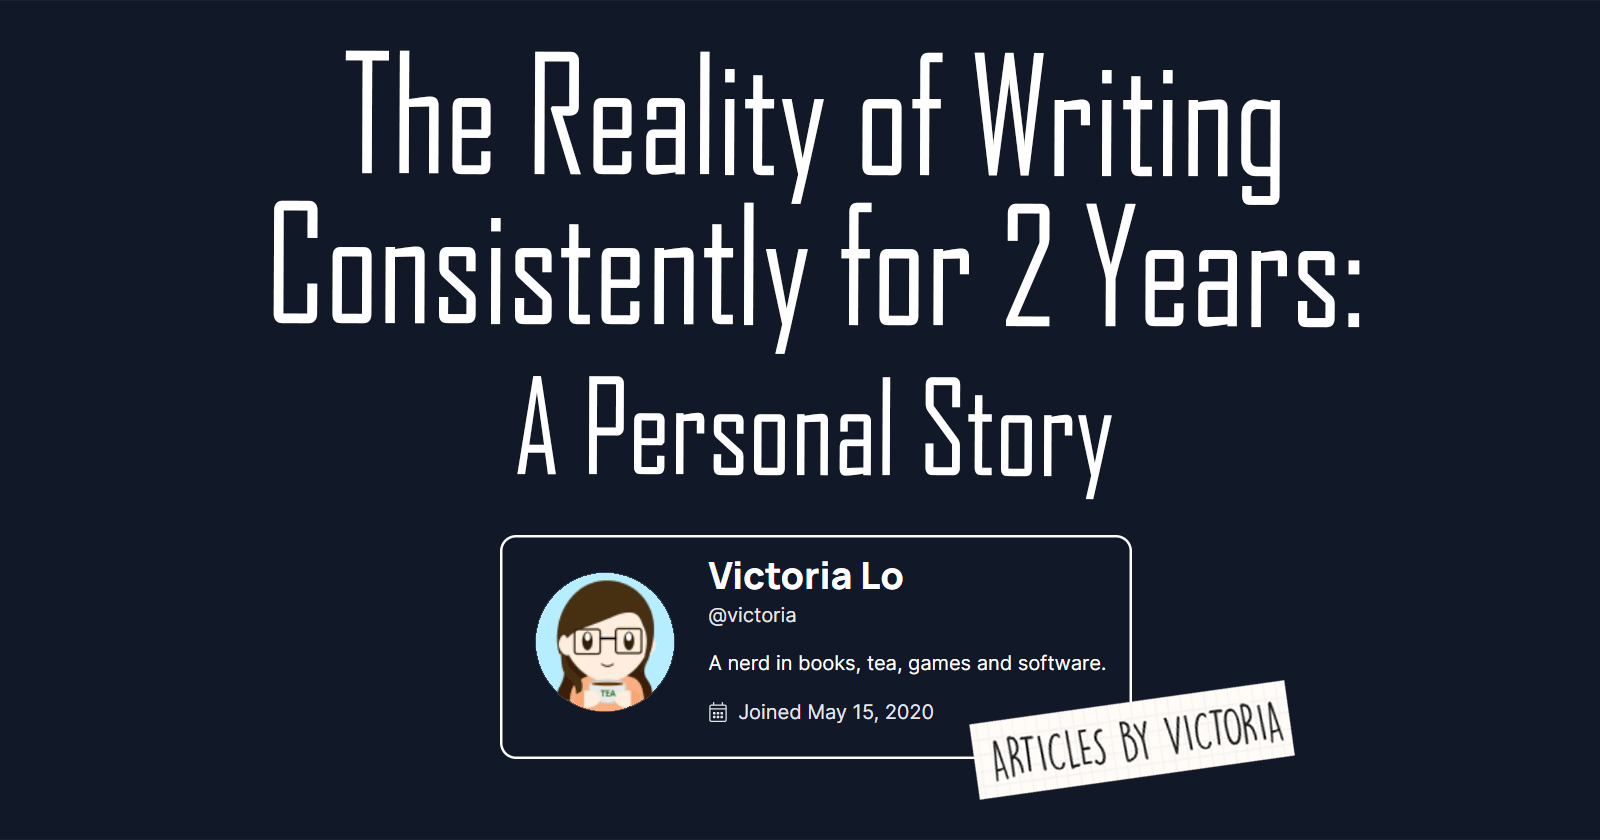 The Reality of Writing Consistently for 2 Years: A Personal Story